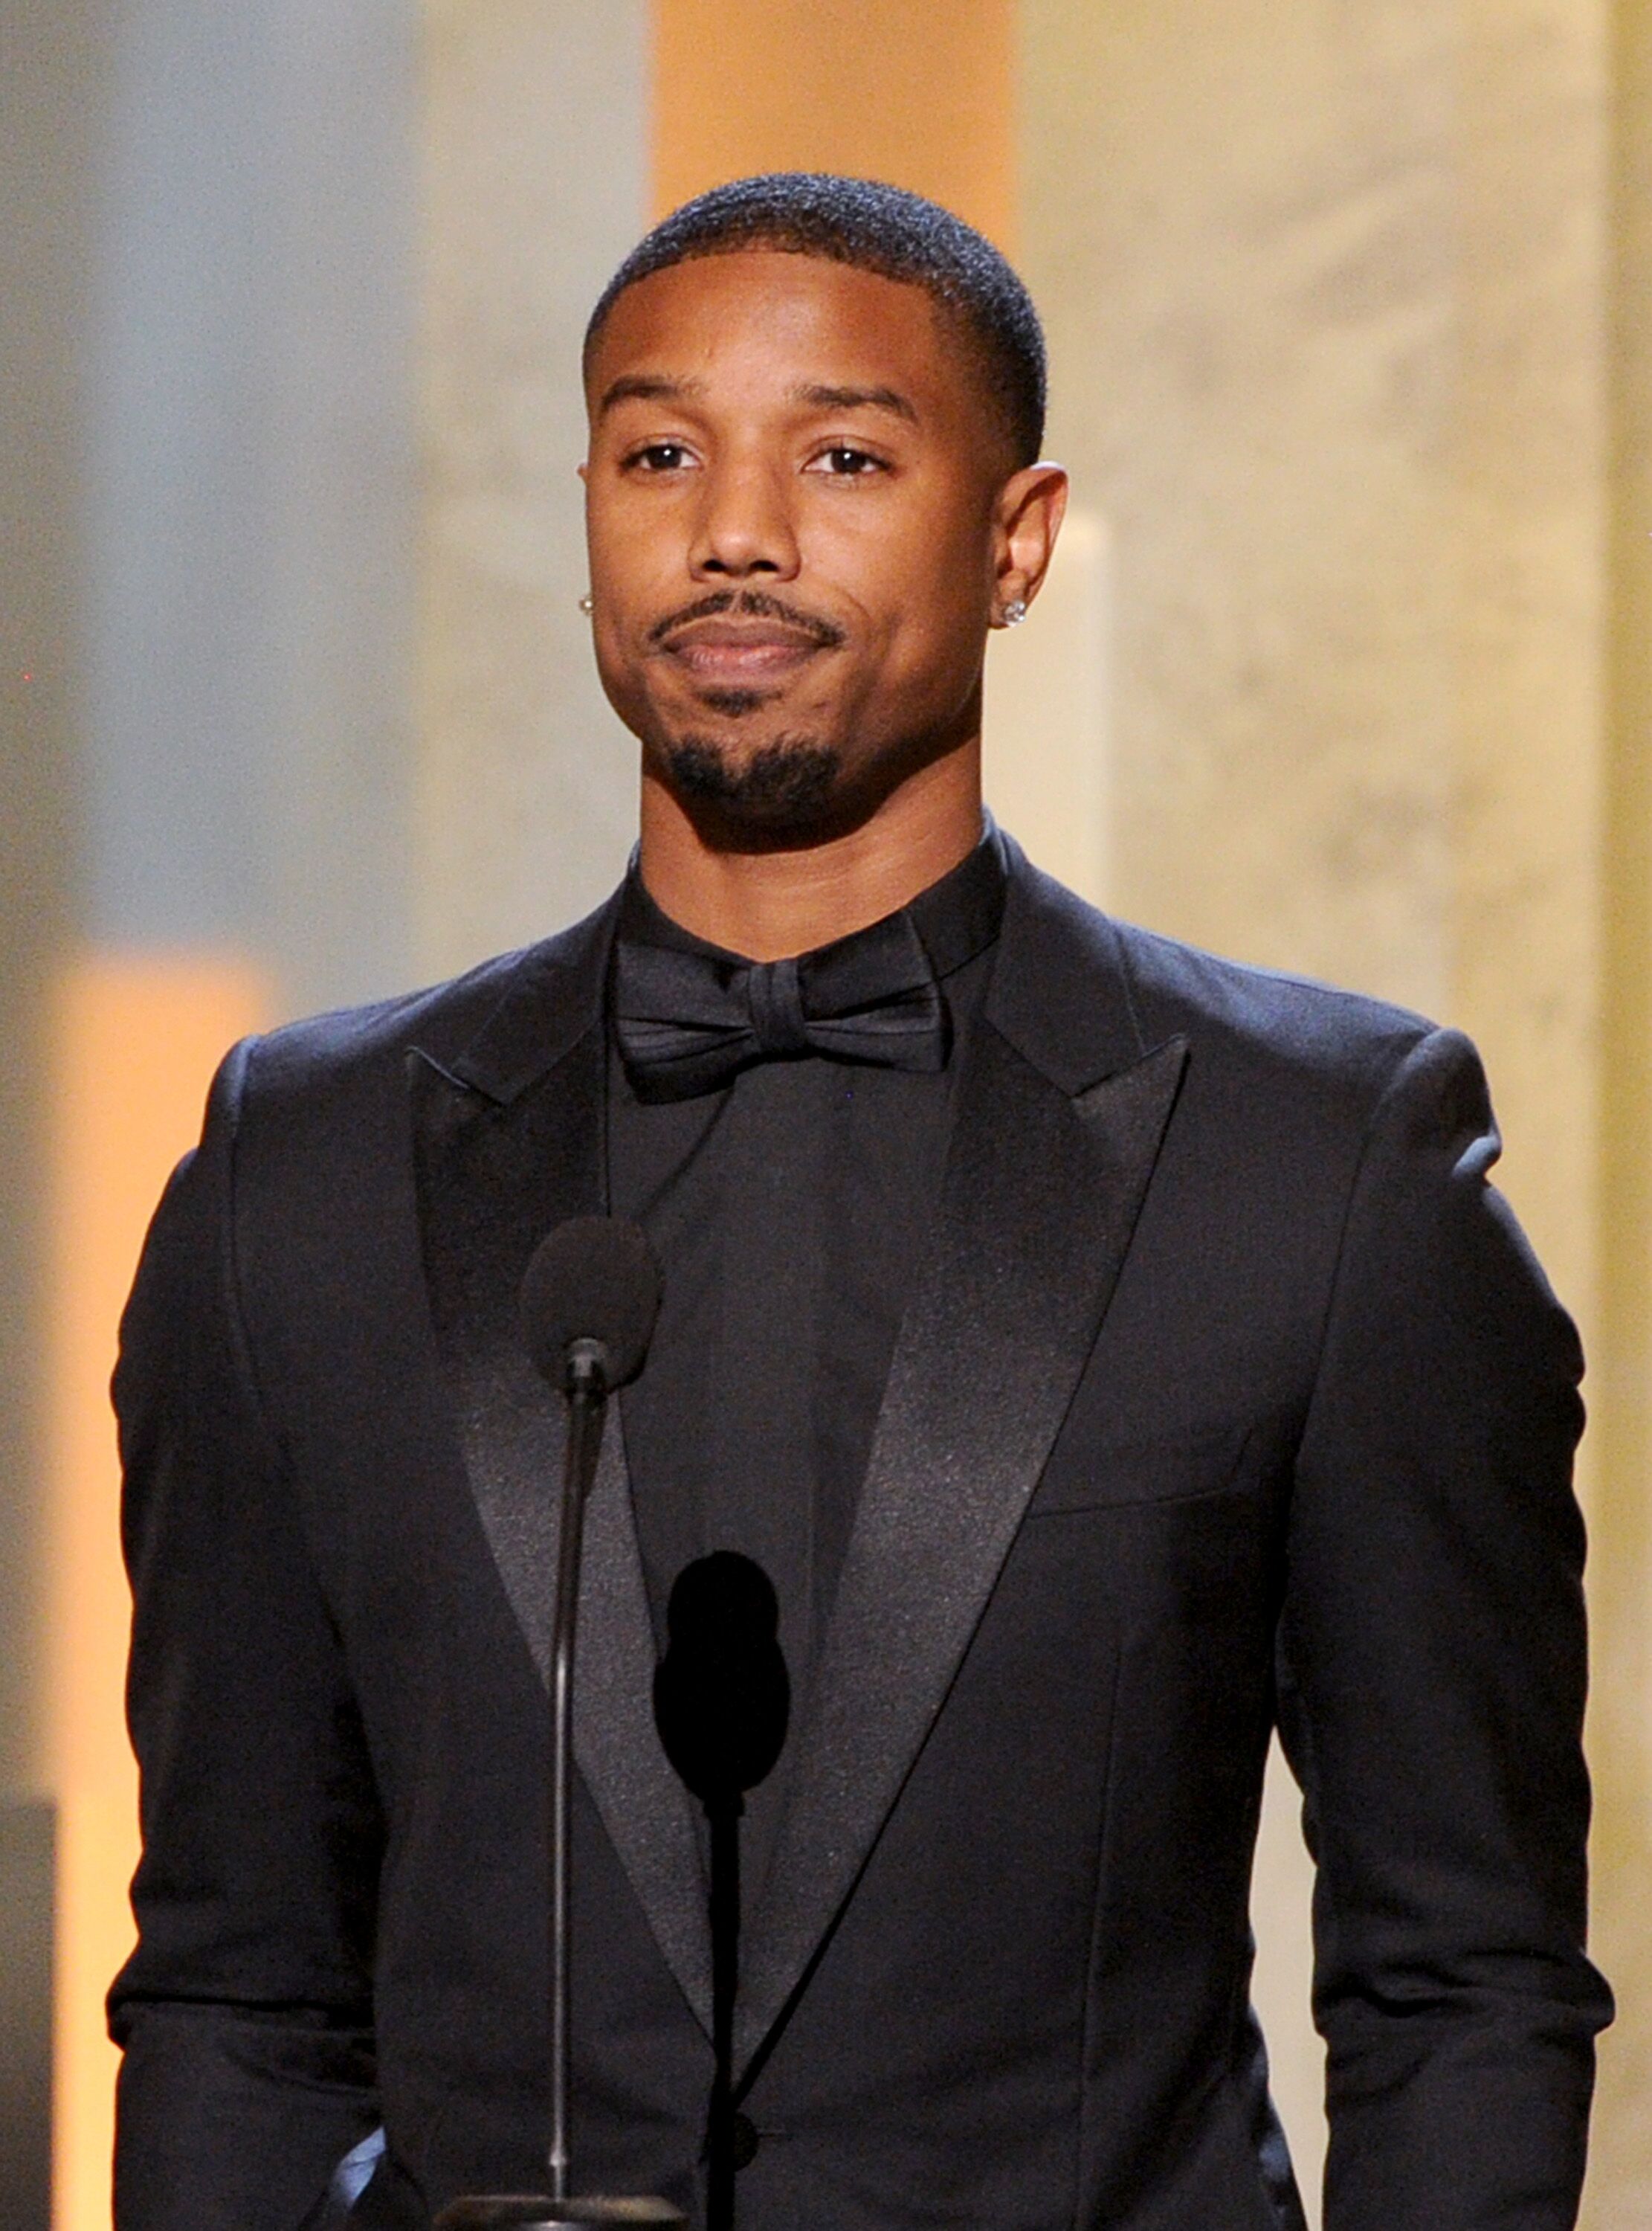 Actor Michael B. Jordan speaks onstage during the 45th NAACP Image Awards presented by TV One at Pasadena Civic Auditorium on February 22, 2014 in Pasadena, California | Photo: Getty Images